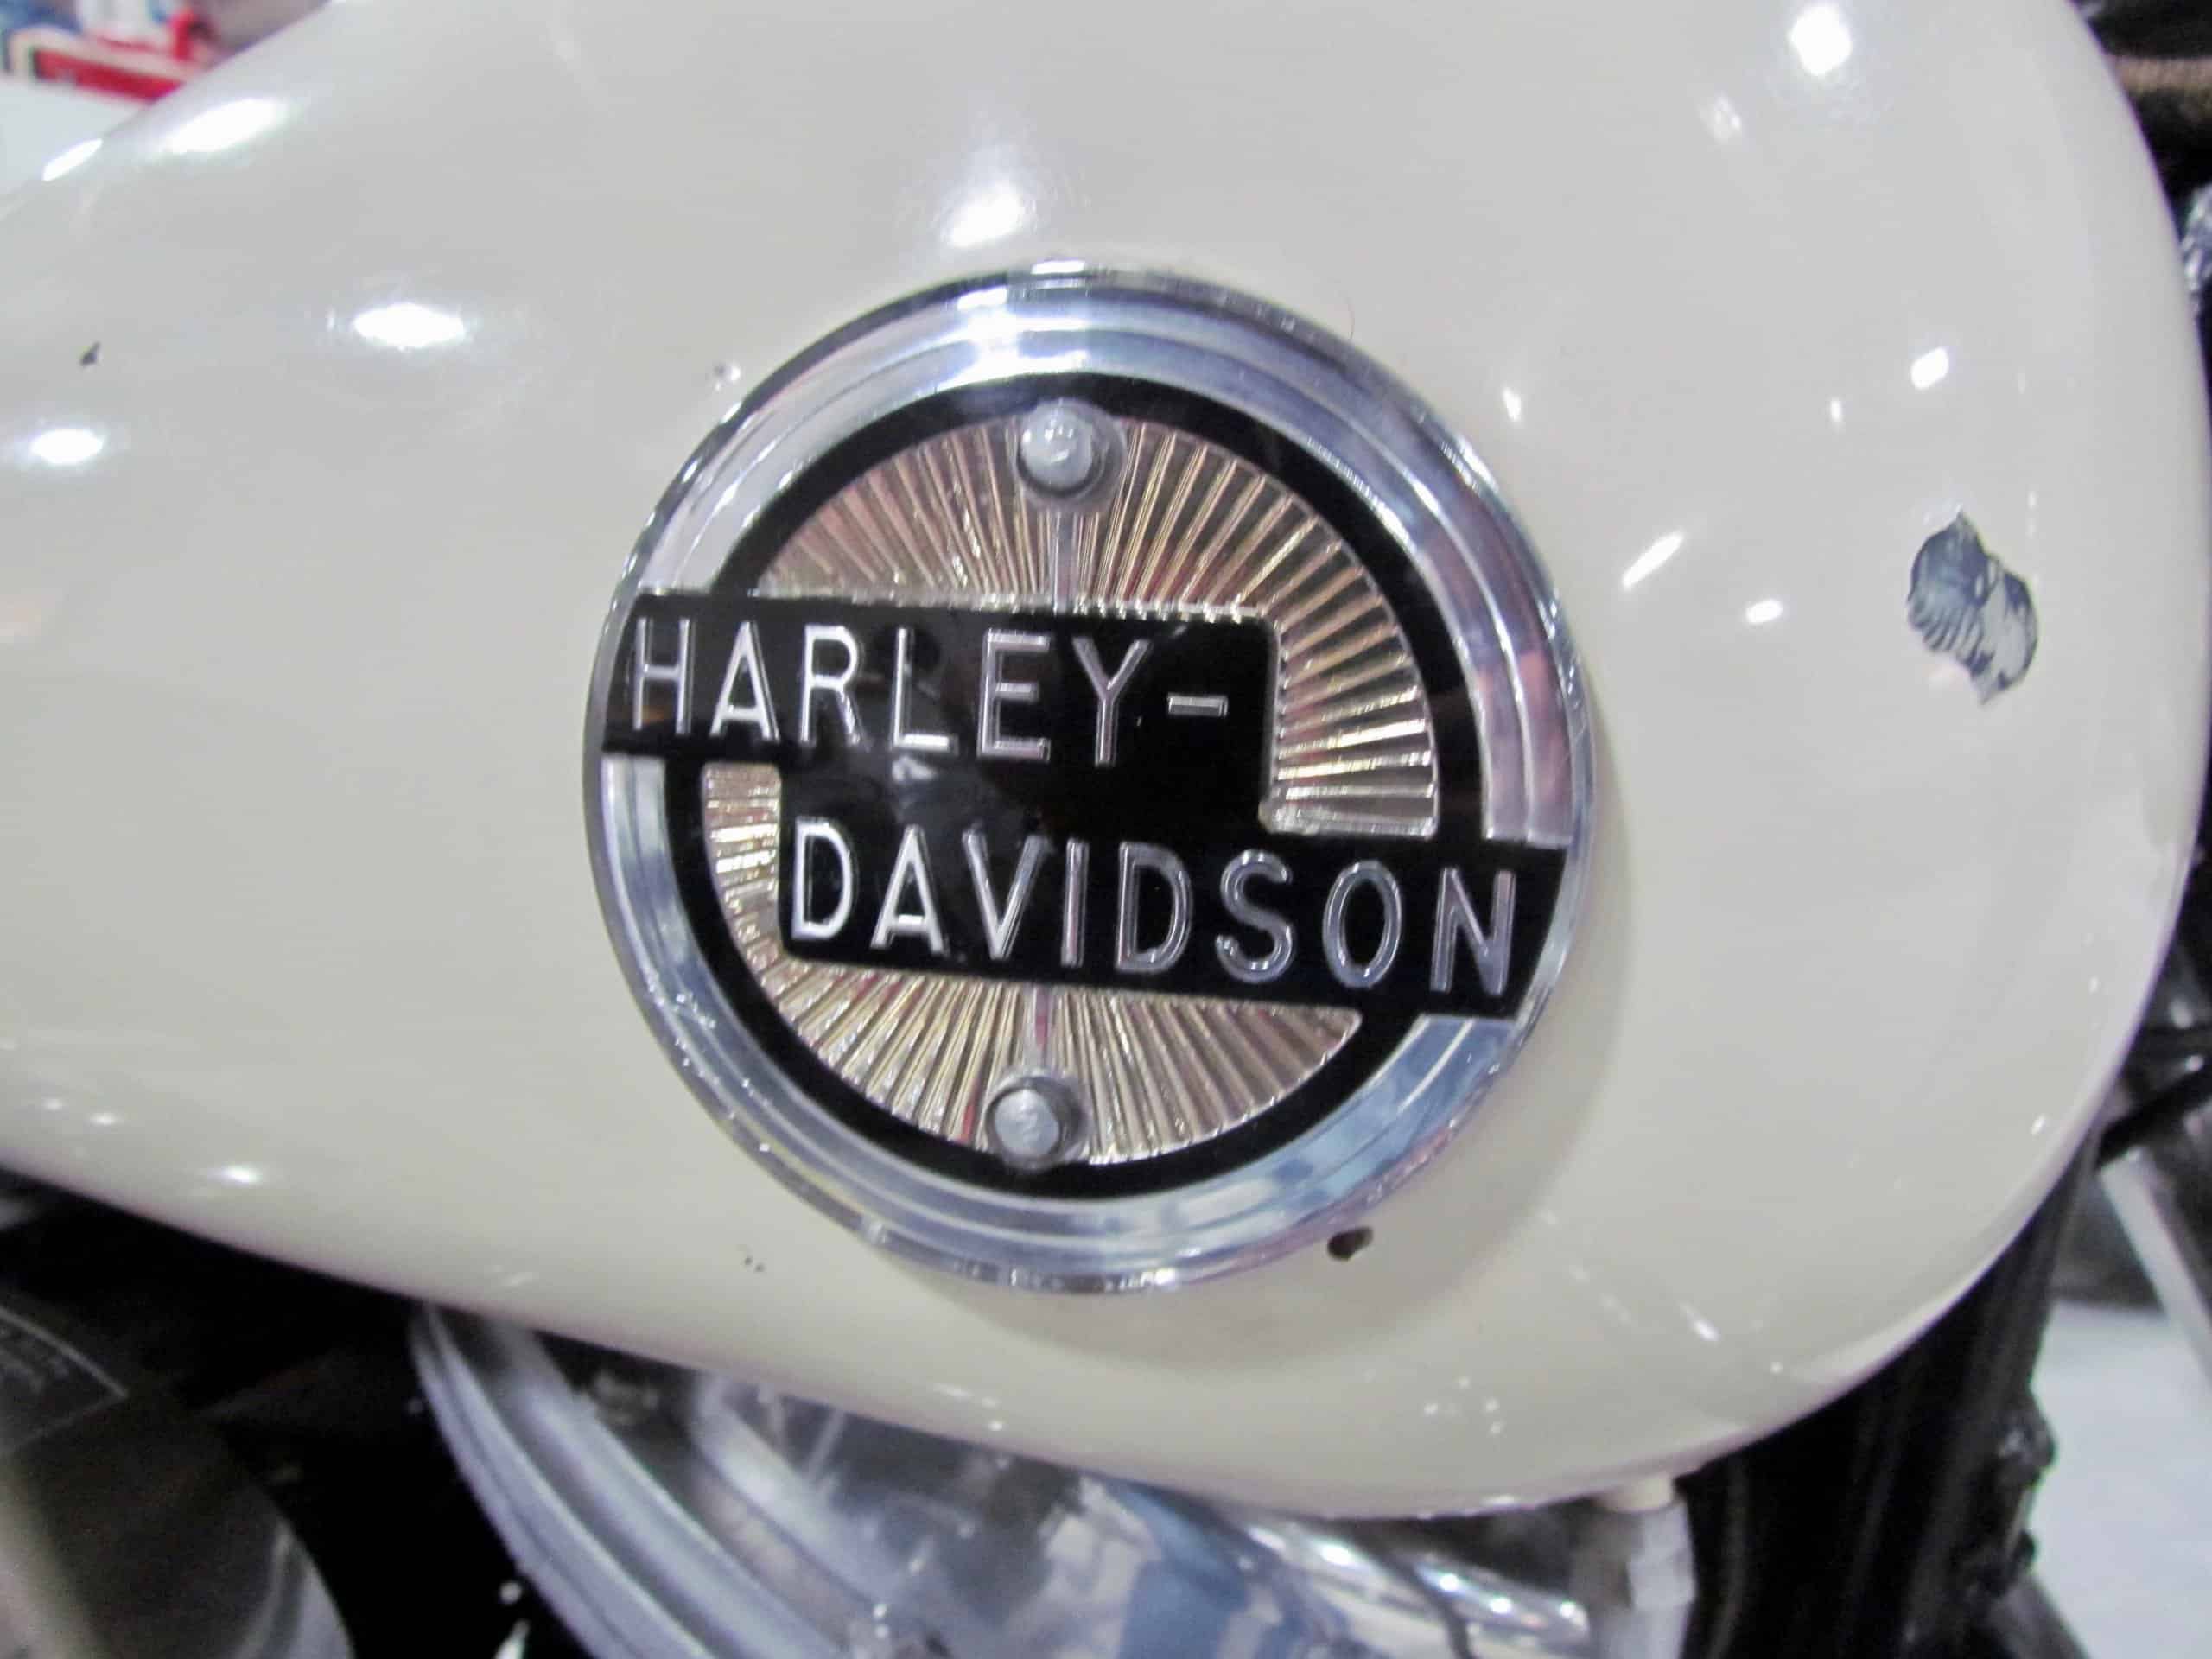 Harley-Davidson, Branding iron: Harley opts for variety, ClassicCars.com Journal